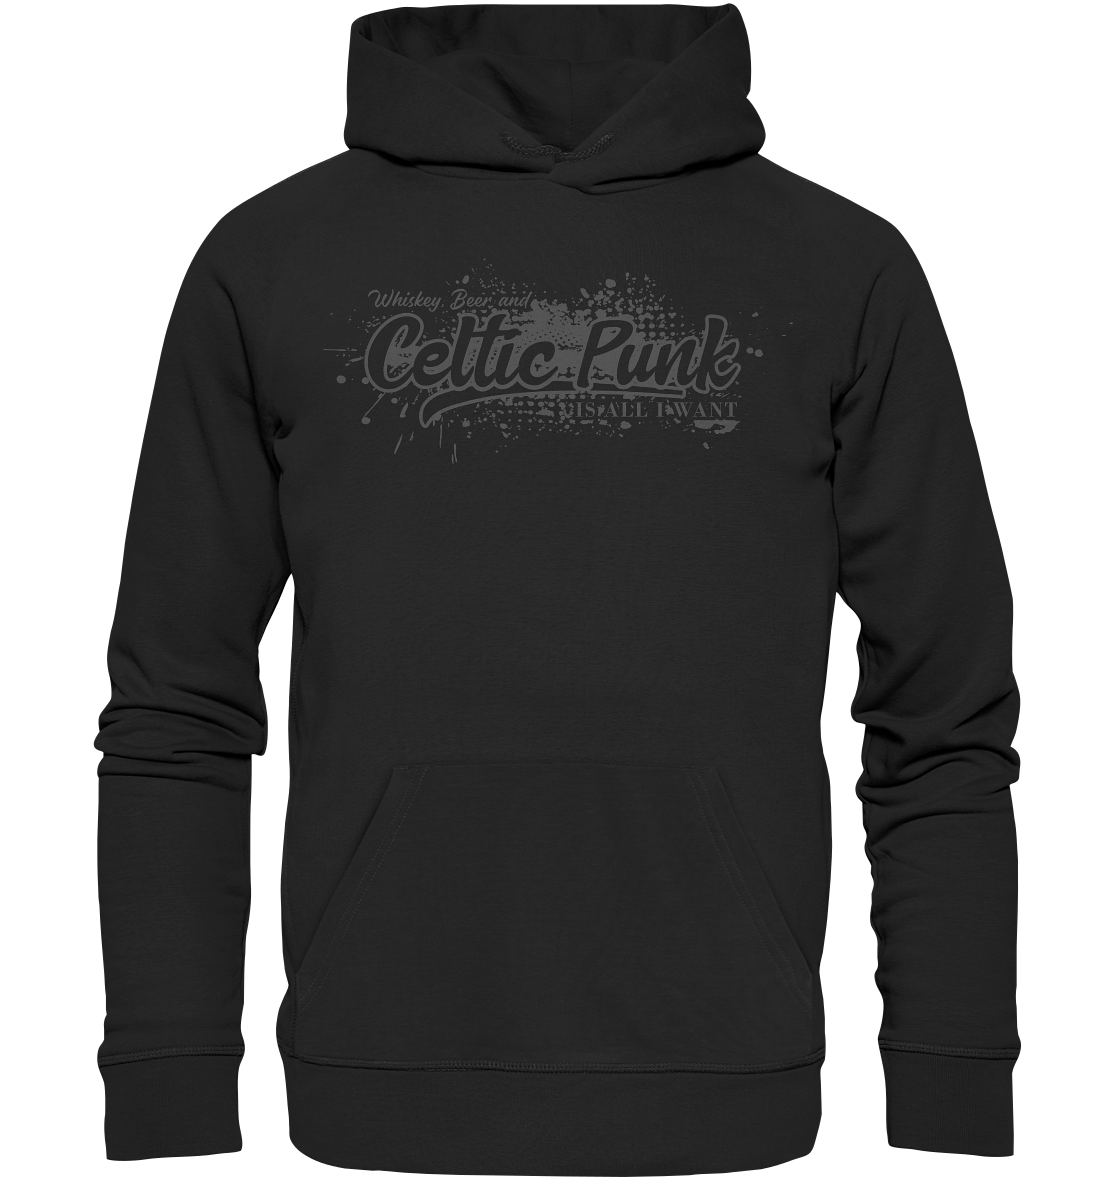 Whiskey, Beer And Celtic Punk "Is All I Want" - Premium Unisex Hoodie